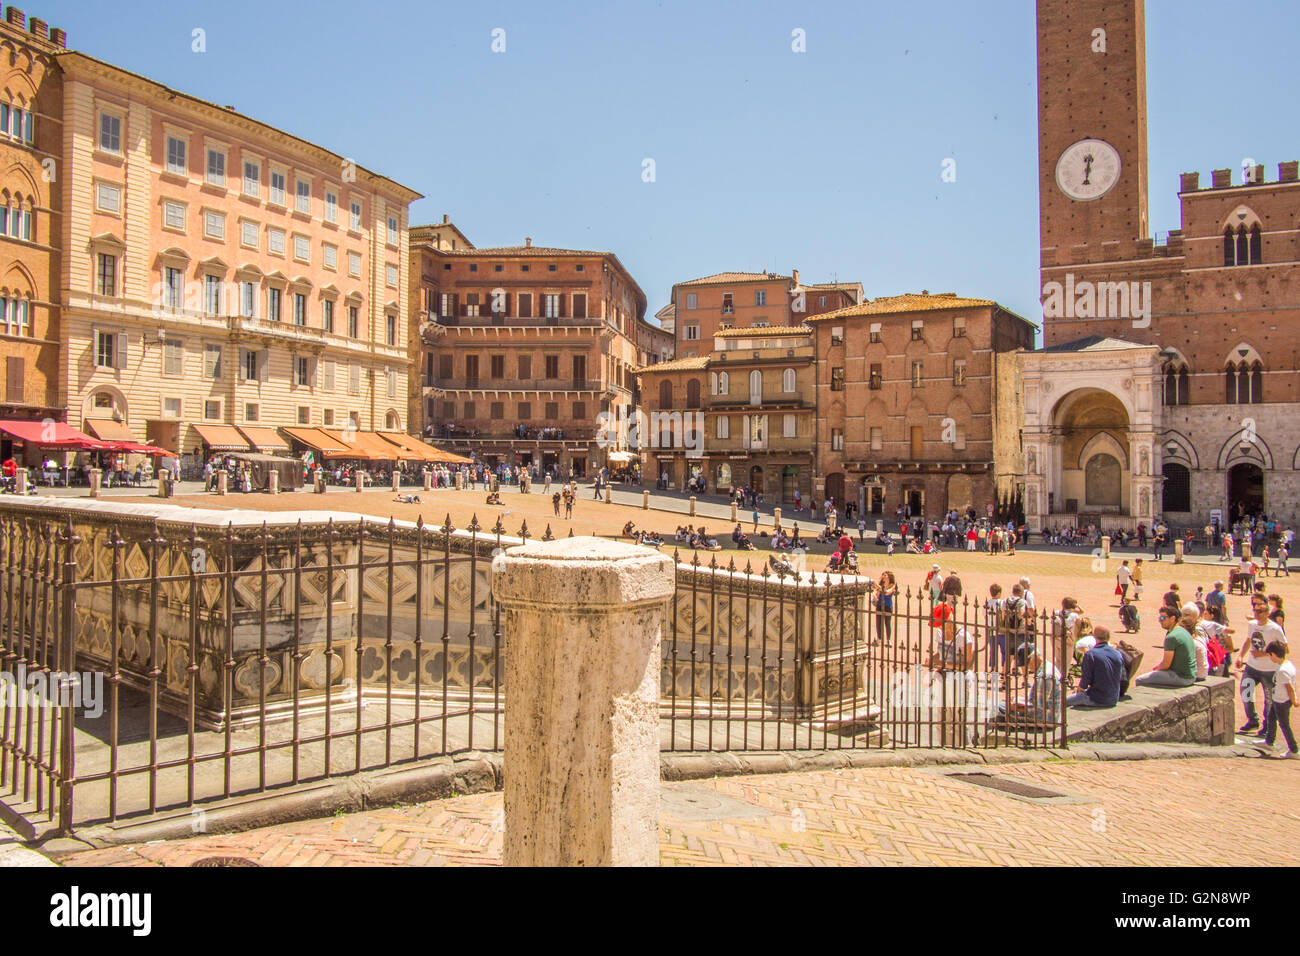 'Il Campo', a medieval Piazza in Siena, Tuscany, Italy The clock tower of the Palazzo Pubblico (town hall) is in picture. Stock Photo